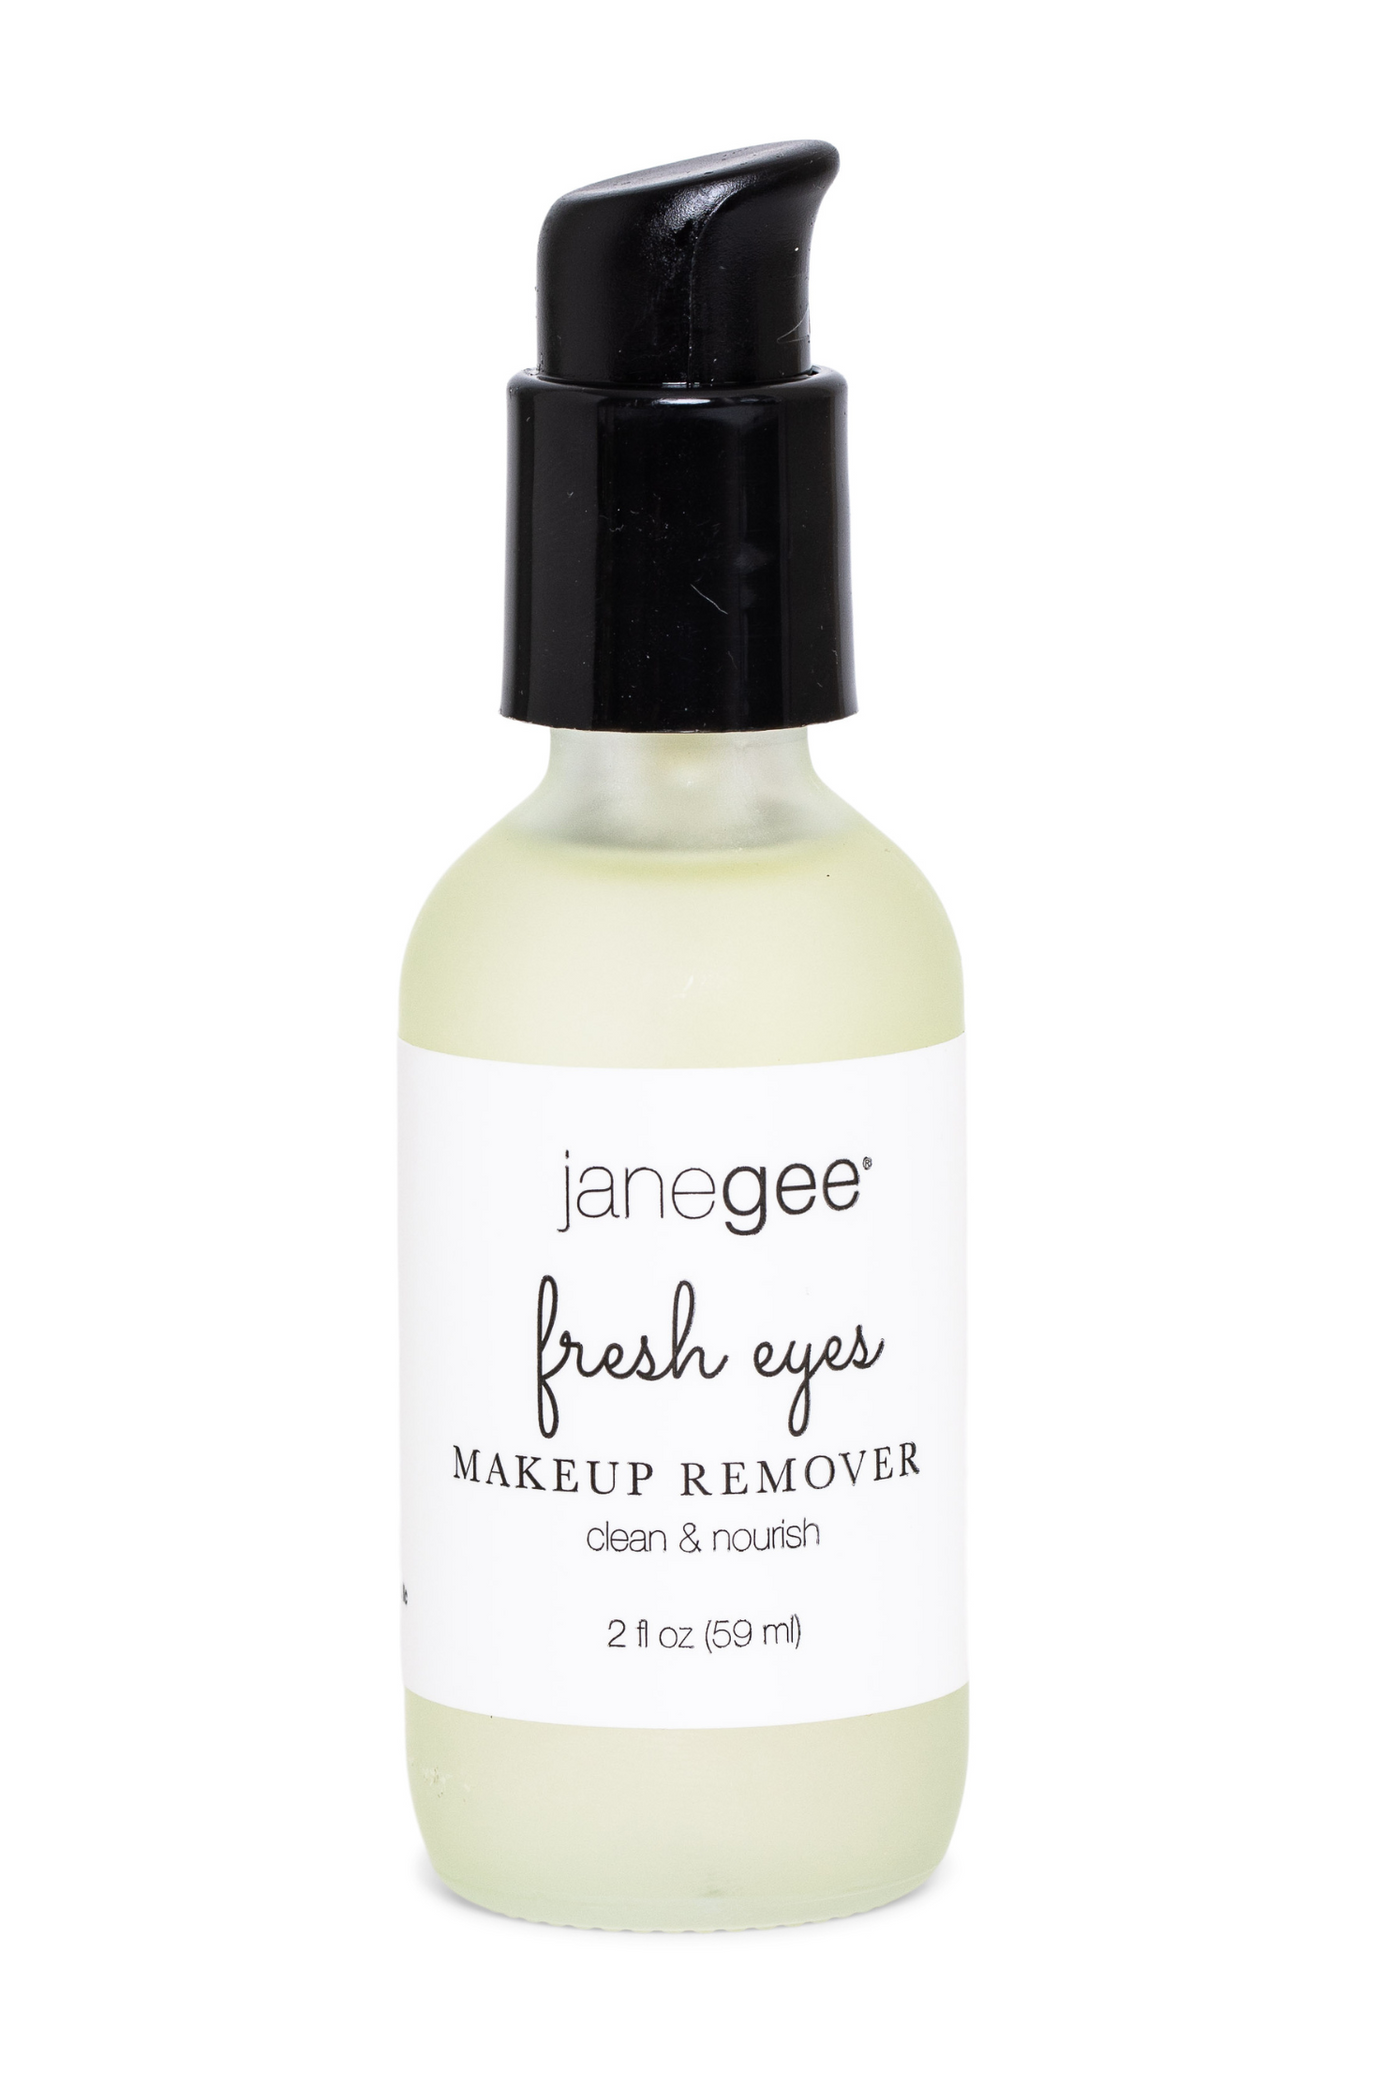 janegee Fresh Eyes Makeup Remover